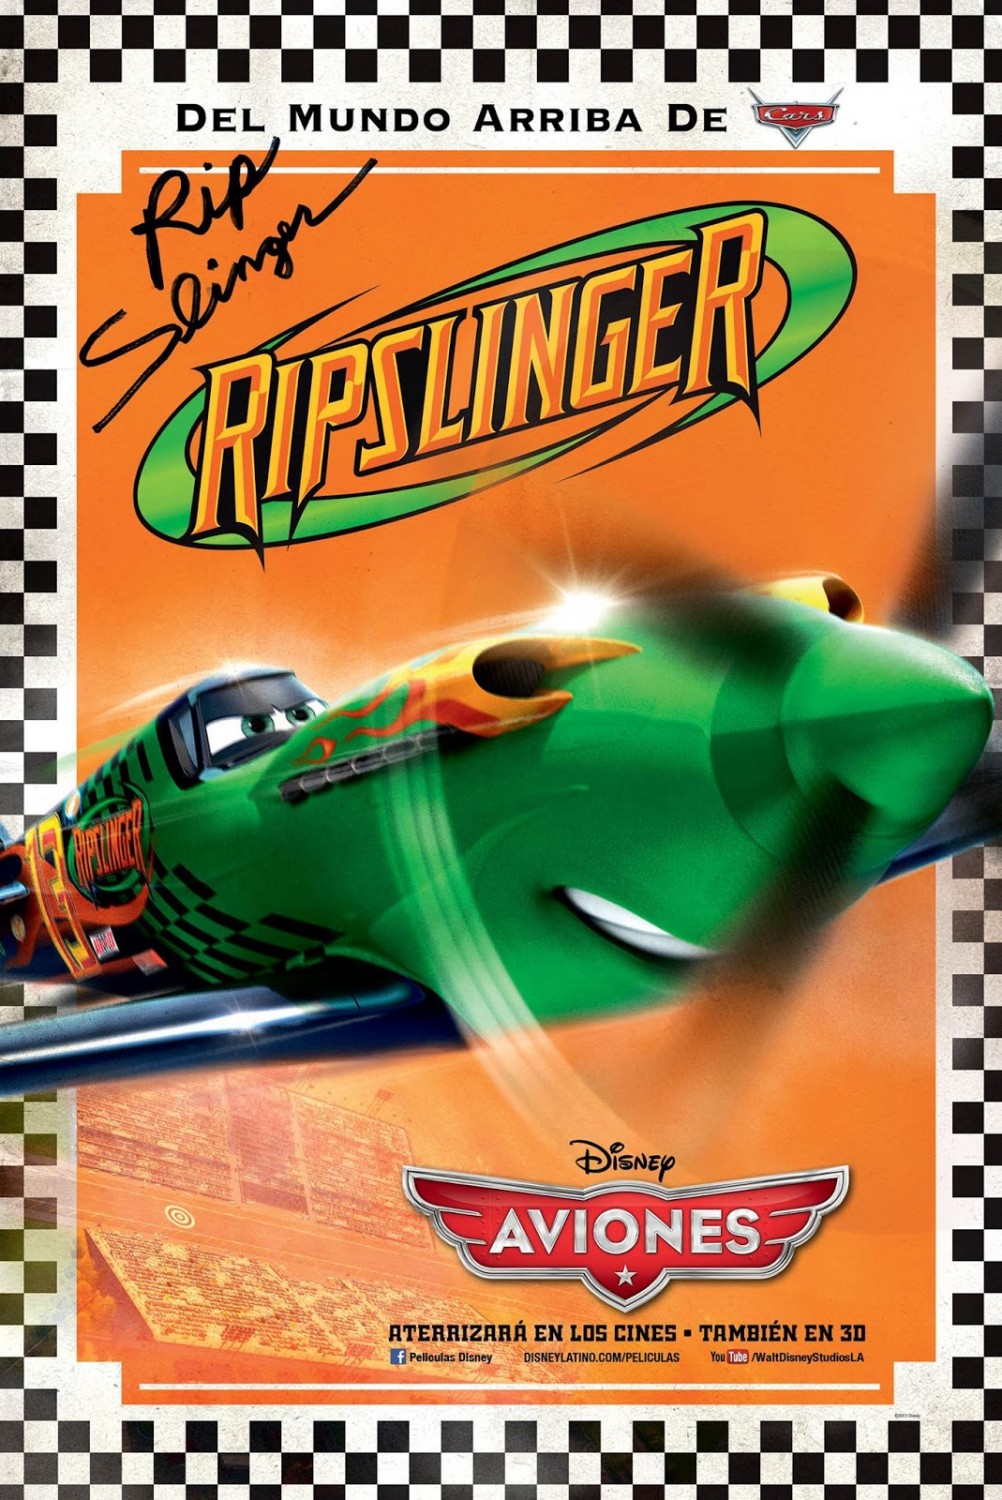 Extra Large Movie Poster Image for Planes (#17 of 17)